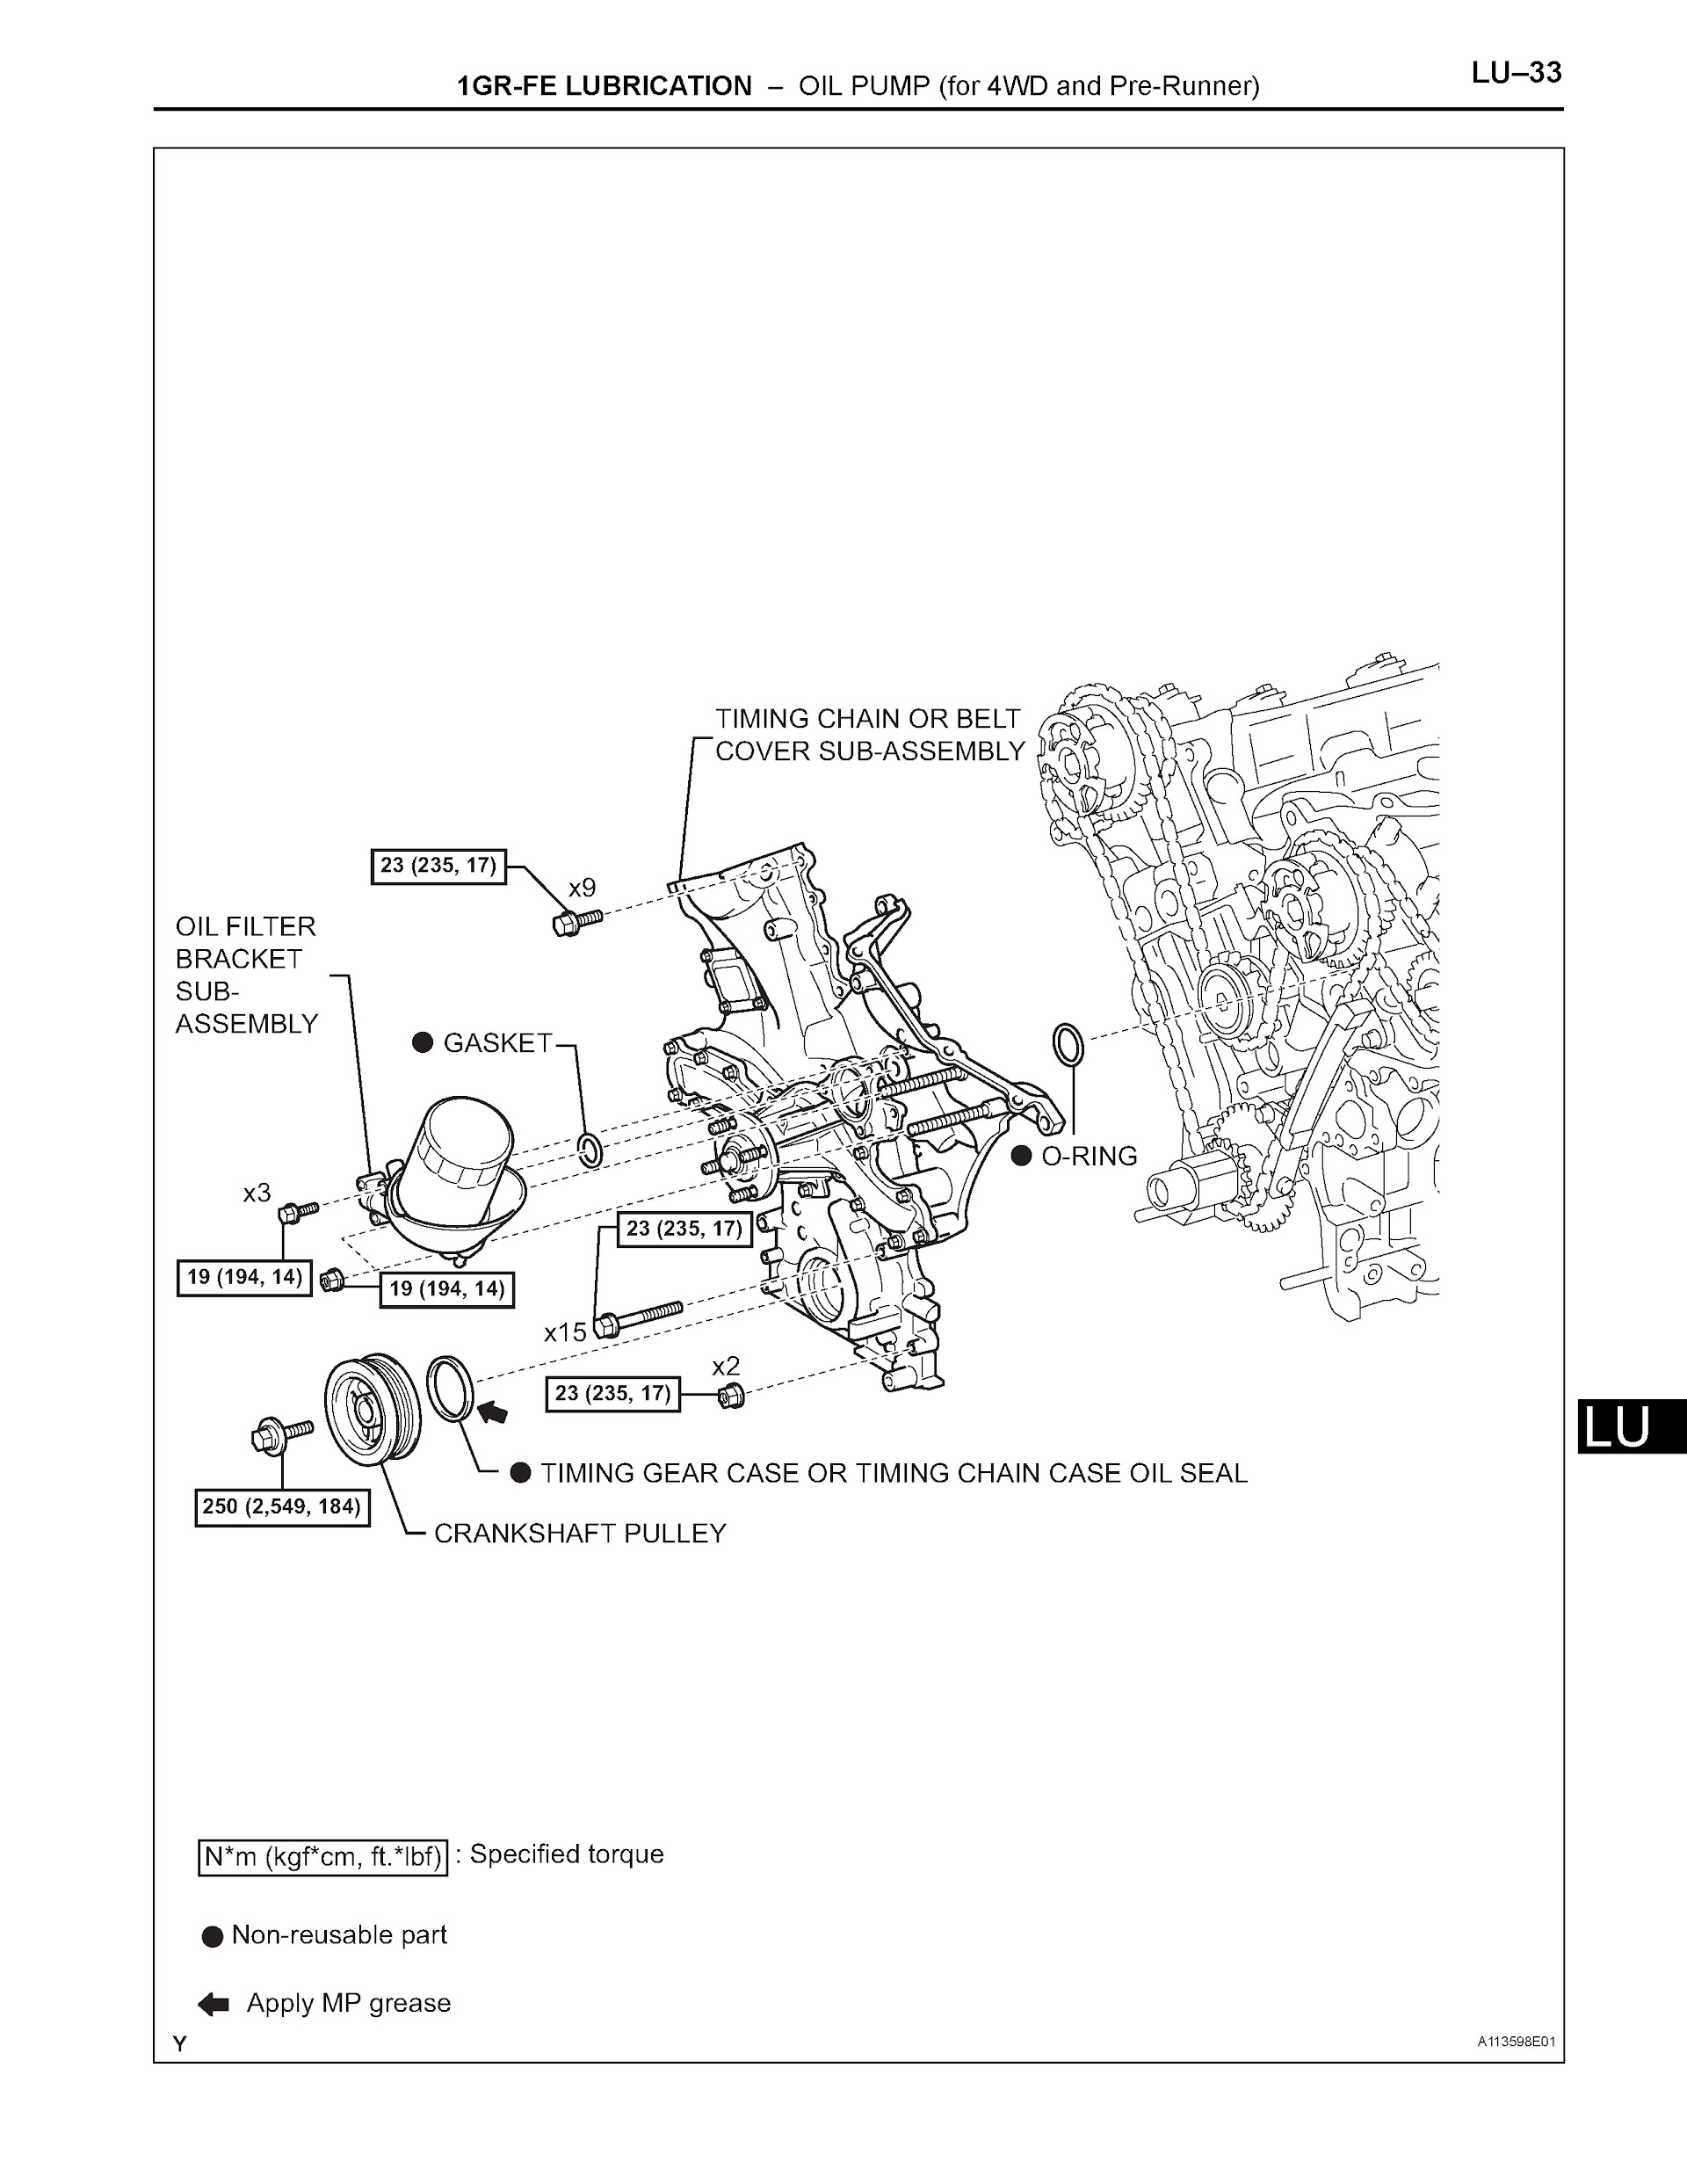 2005-2006 Toyota Tacoma Repair Manual 1GR-FE Lubrication Oil Pump 4WD and Pre-Runner